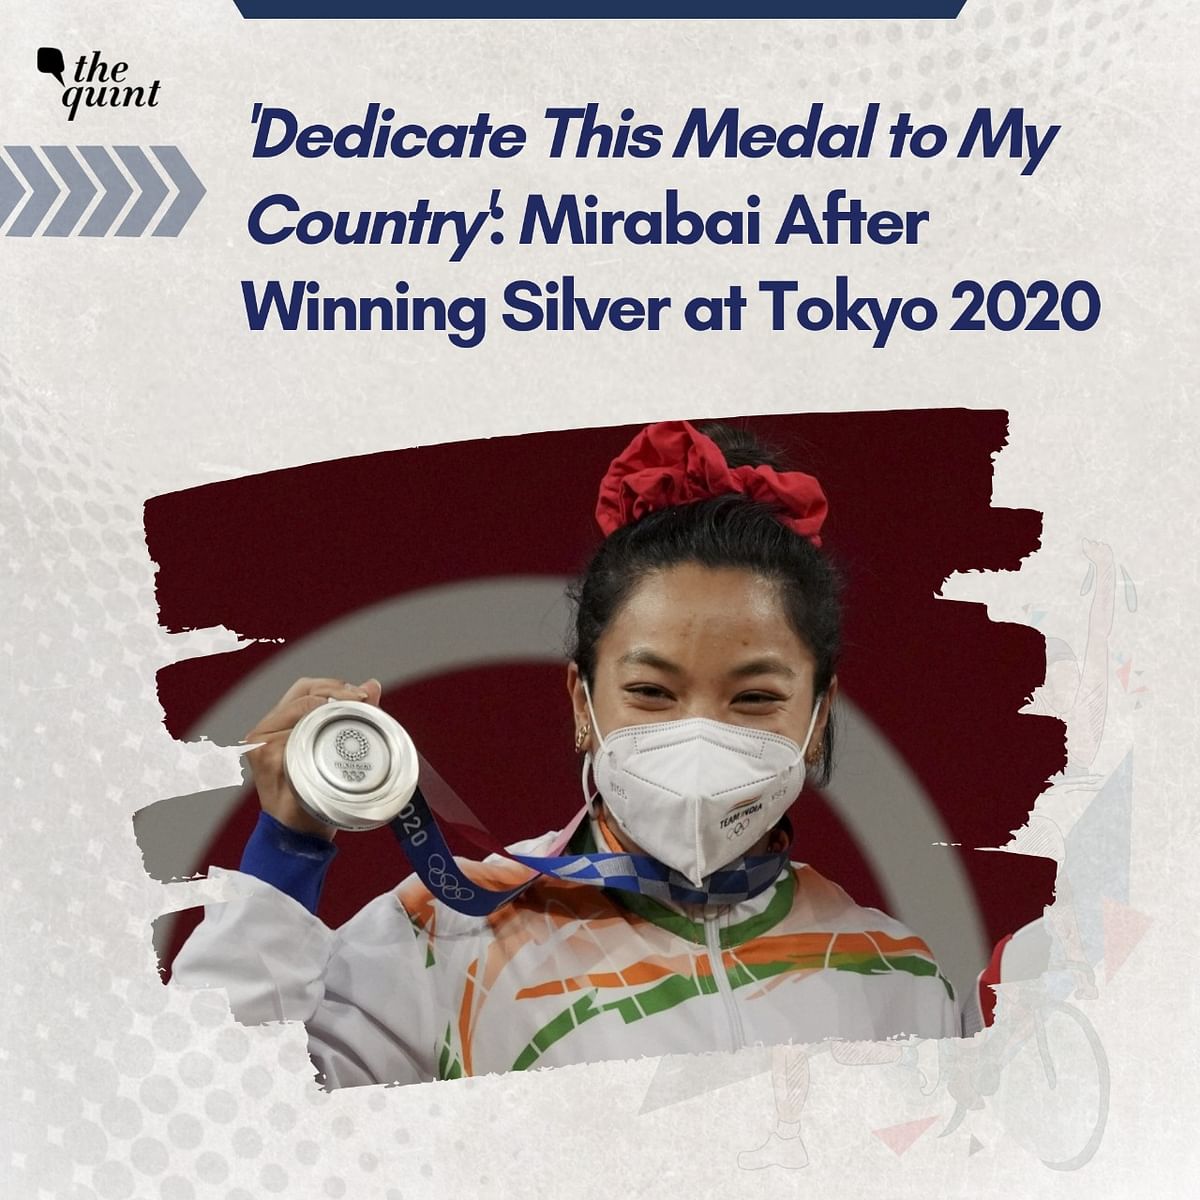 Mirabai Chanu won India's first medal at the 2020 Tokyo Olympics when she clinched Silver in weightlifting. 